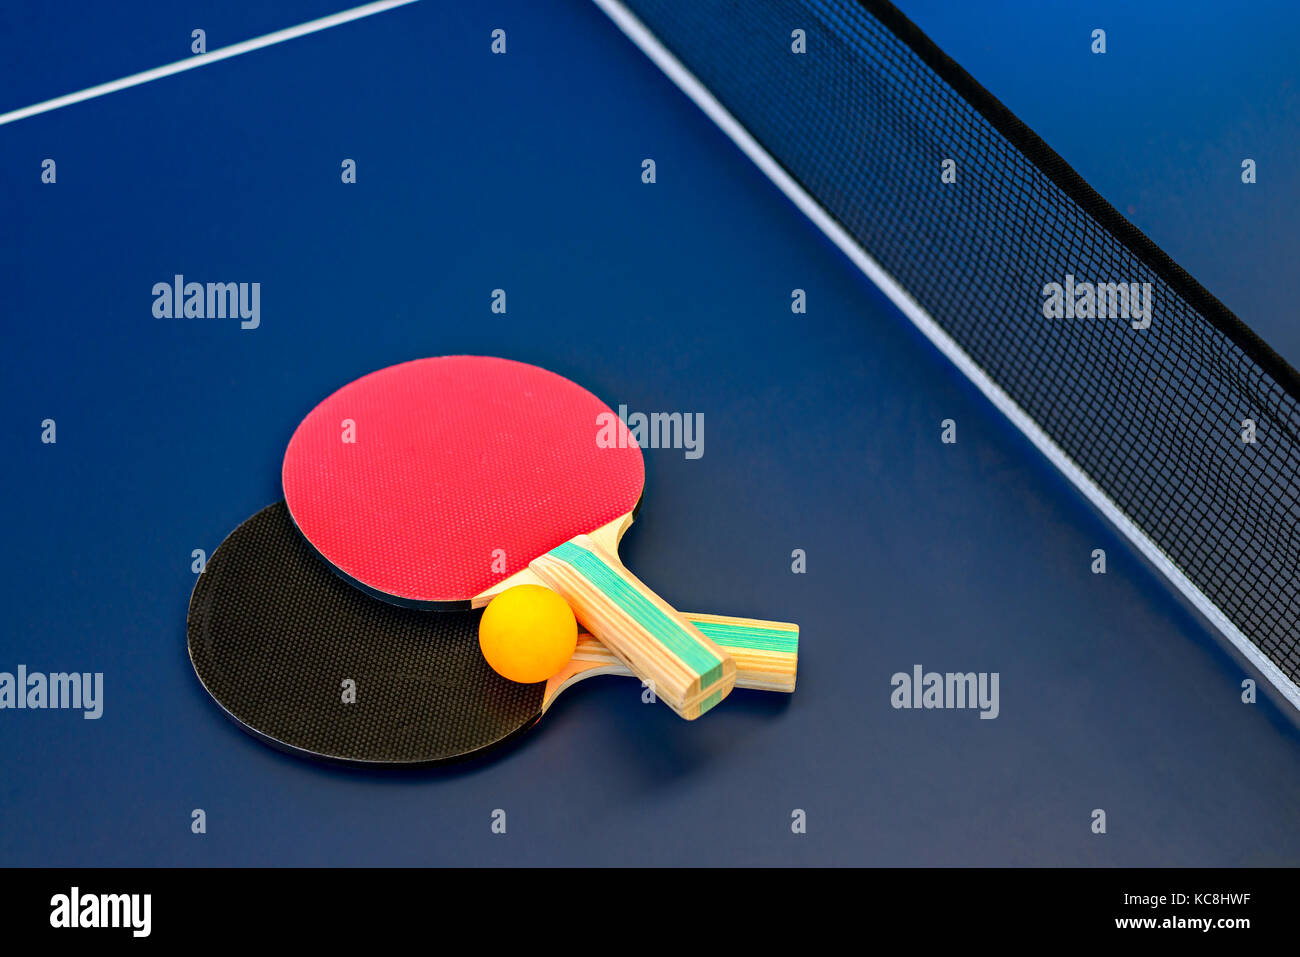 Table tennis table with rackets, net and orange ball Stock Photo